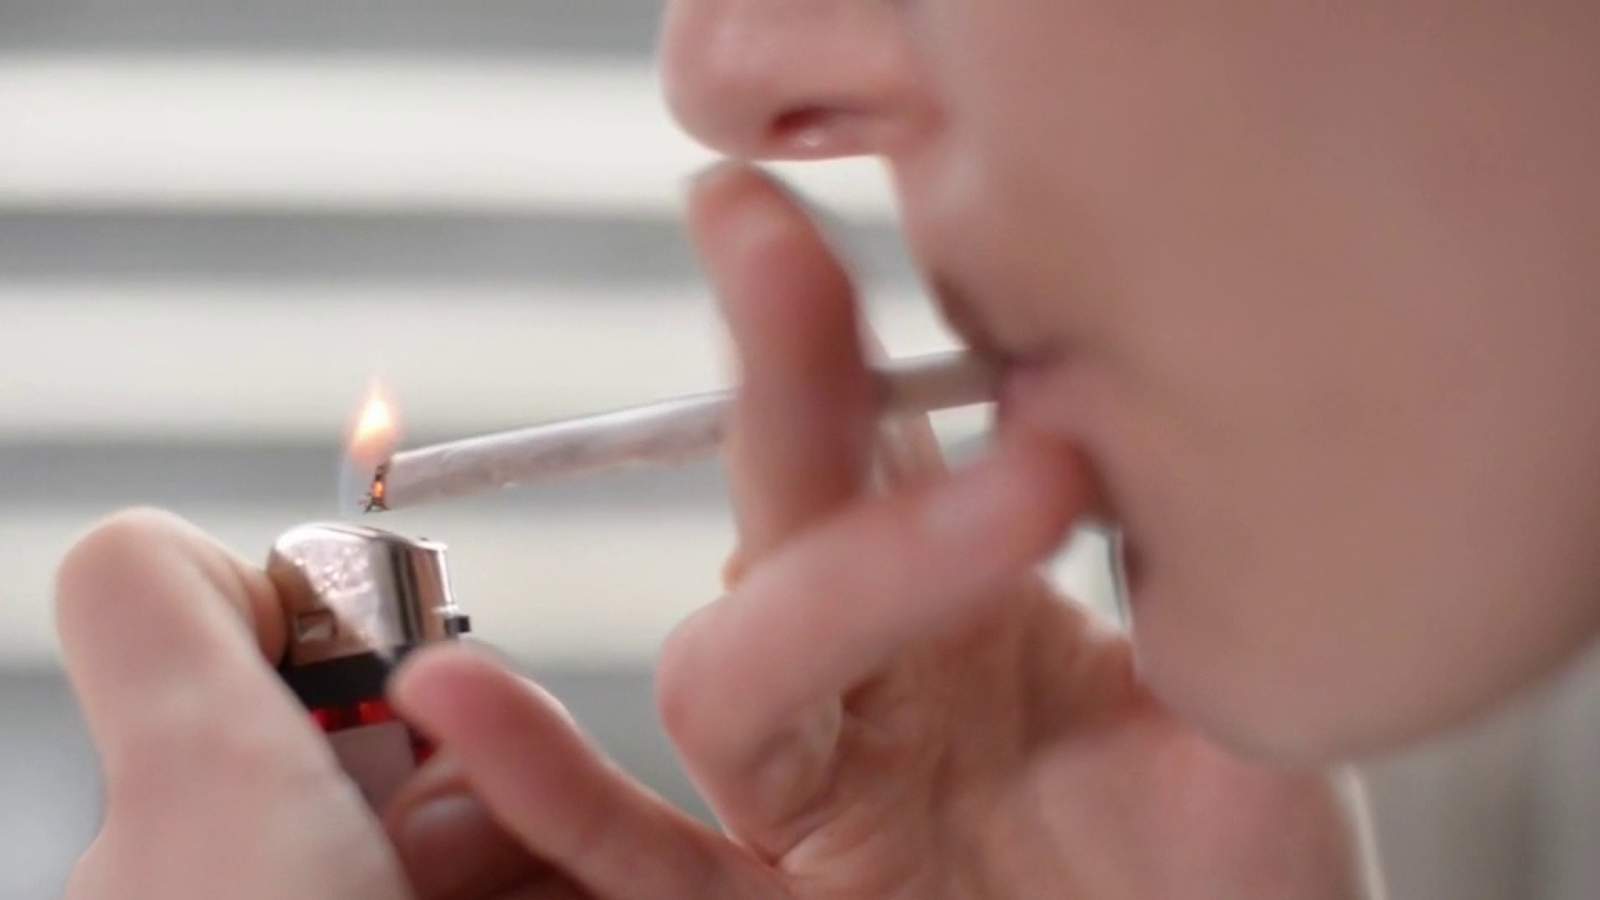 World Health Organization creates ‘Commit to Quit’ initiative to help people quit smoking